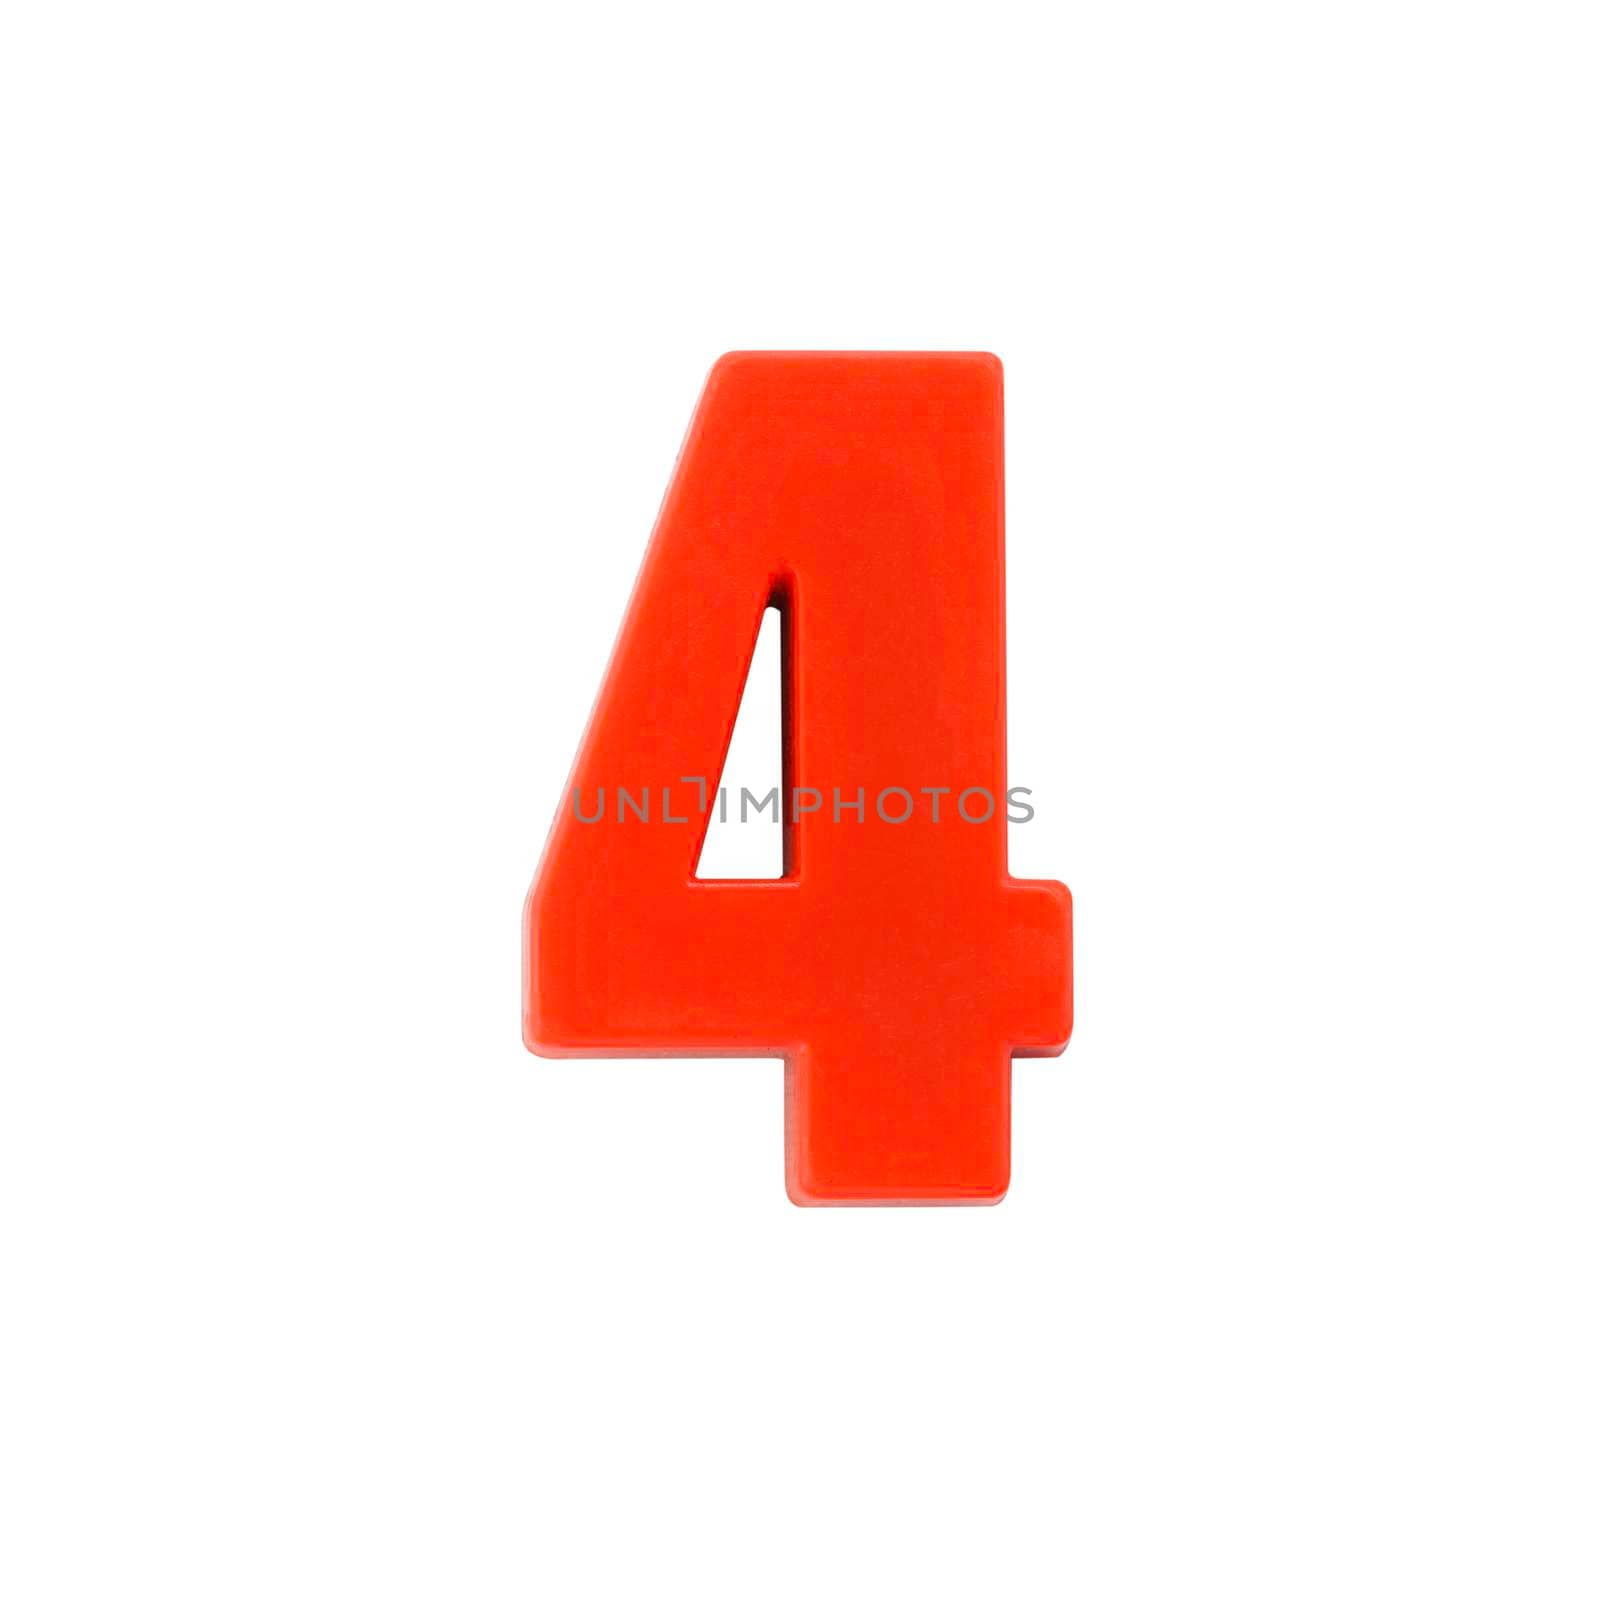 Shot of a number four made of red plastic with clipping path